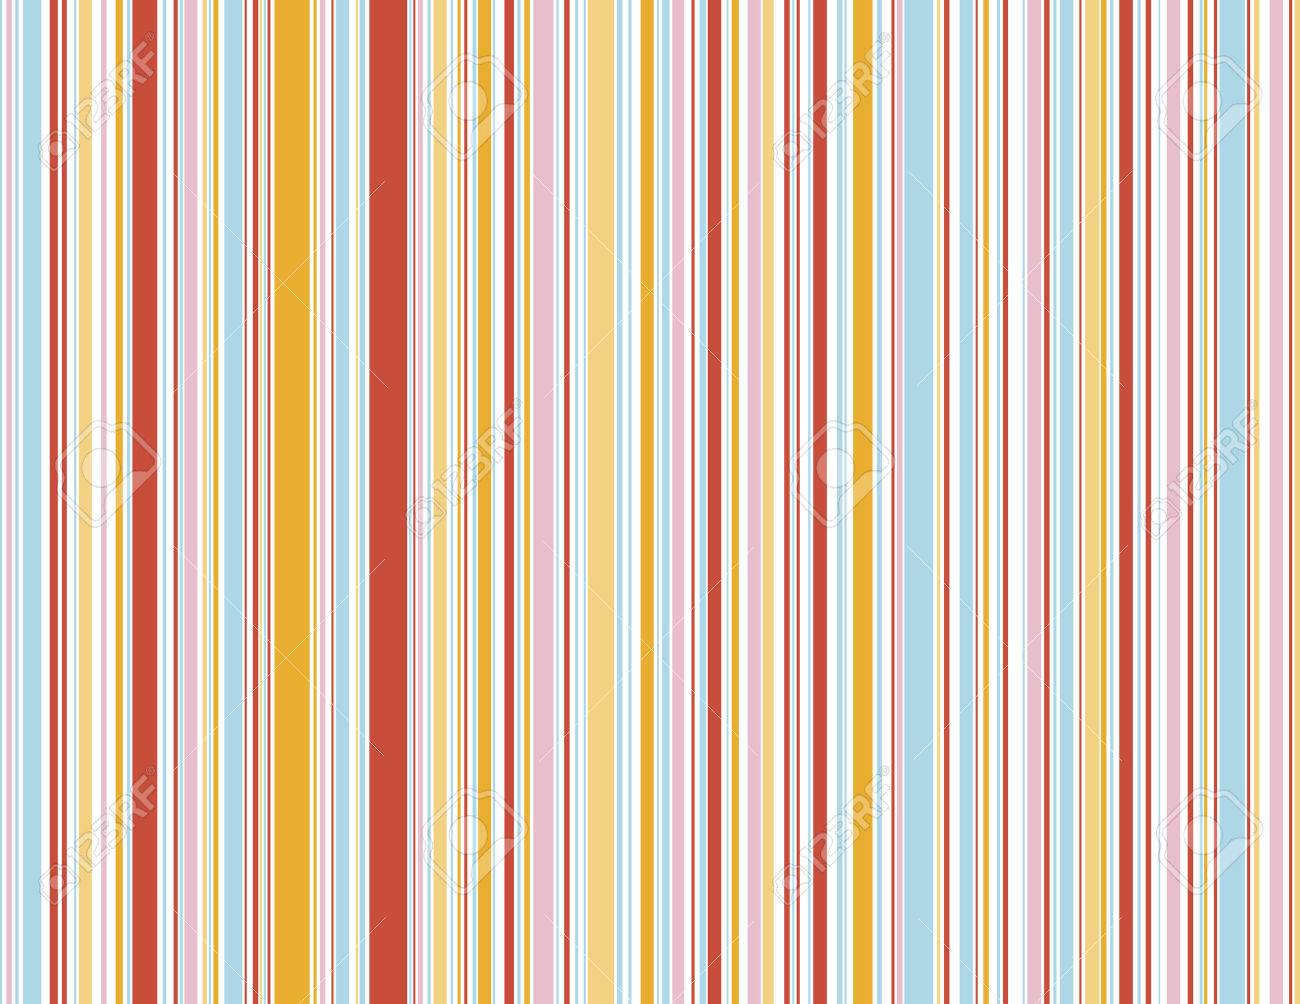 Retro Candy Stripes vector Illustrated Background Royalty Free